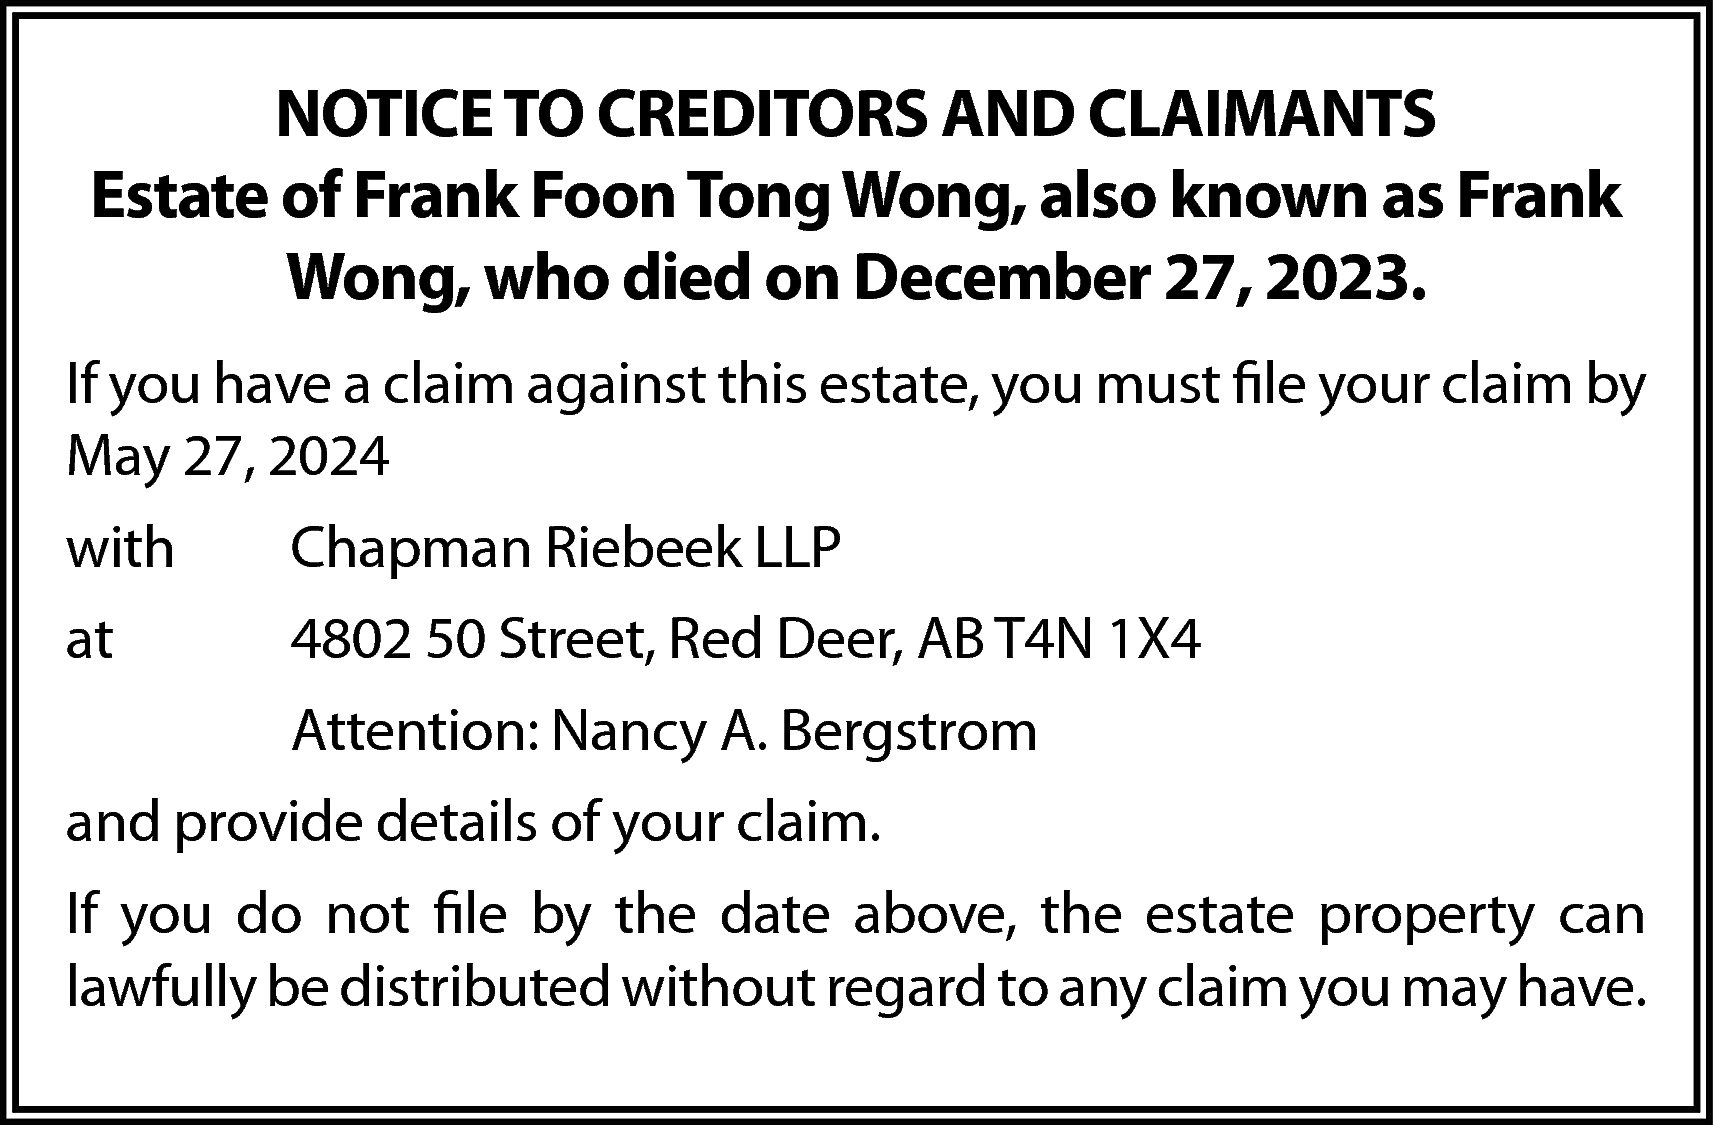 NOTICE TO CREDITORS AND CLAIMANTS  NOTICE TO CREDITORS AND CLAIMANTS  Estate of Frank Foon Tong Wong, also known as Frank  Wong, who died on December 27, 2023.  If you have a claim against this estate, you must file your claim by  May 27, 2024  with    Chapman Riebeek LLP    at    4802 50 Street, Red Deer, AB T4N 1X4  Attention: Nancy A. Bergstrom    and provide details of your claim.  If you do not file by the date above, the estate property can  lawfully be distributed without regard to any claim you may have.    